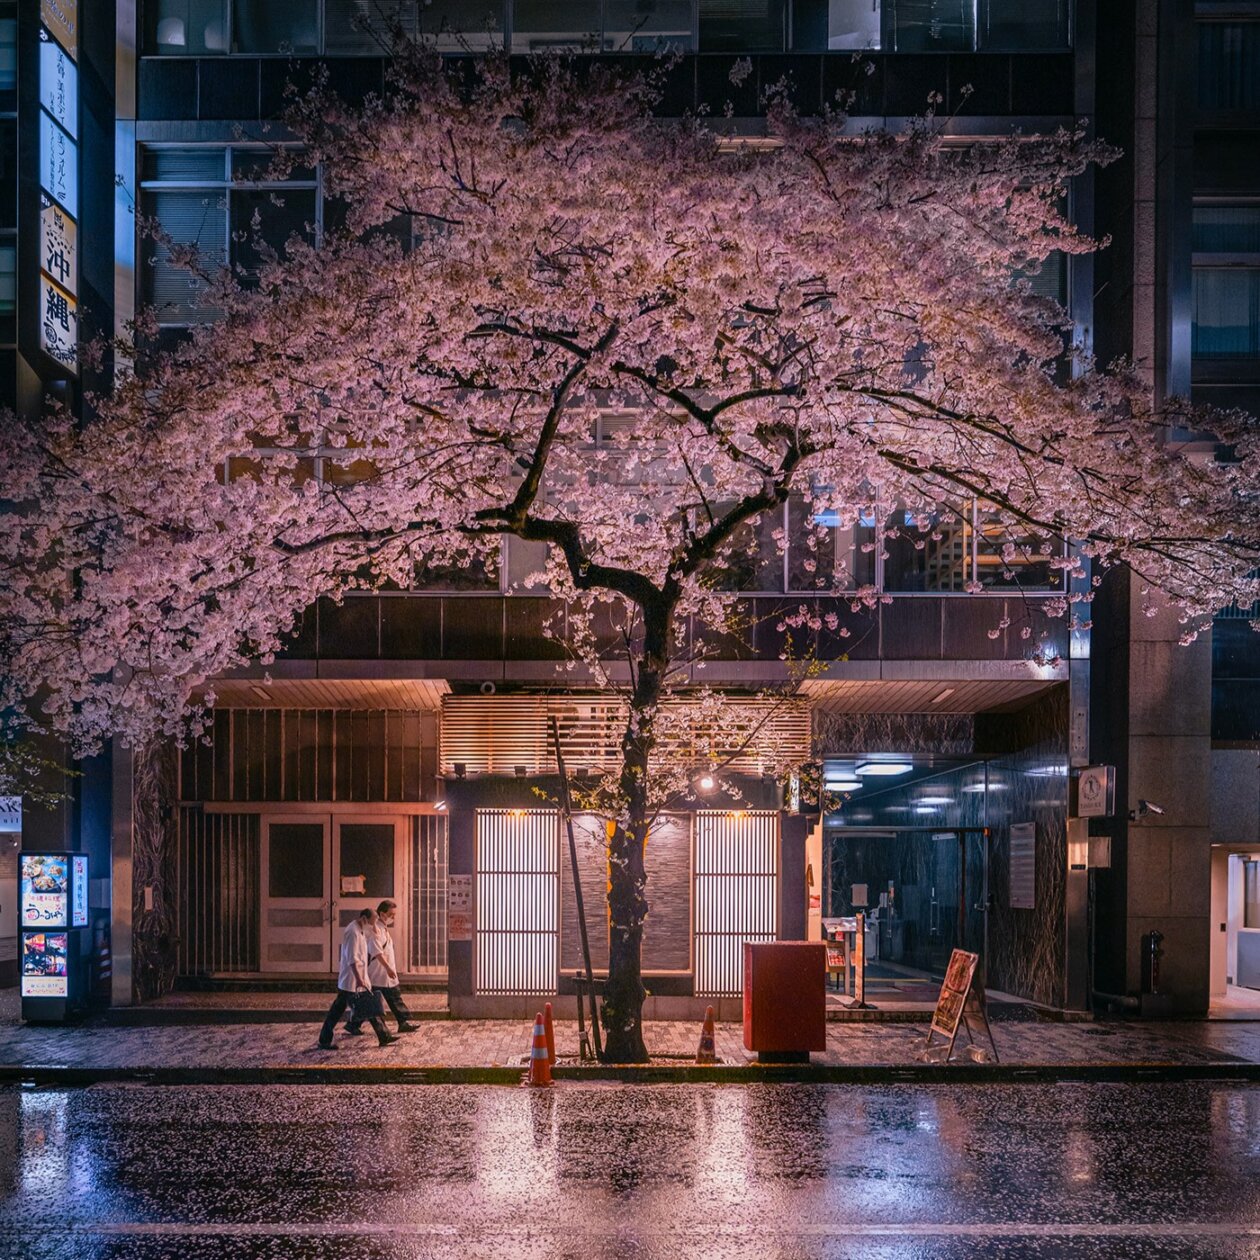 Tokyo in the Rain: Spring Scene, a fascinating photography series of Tokyo streets by Kenta Hayashi